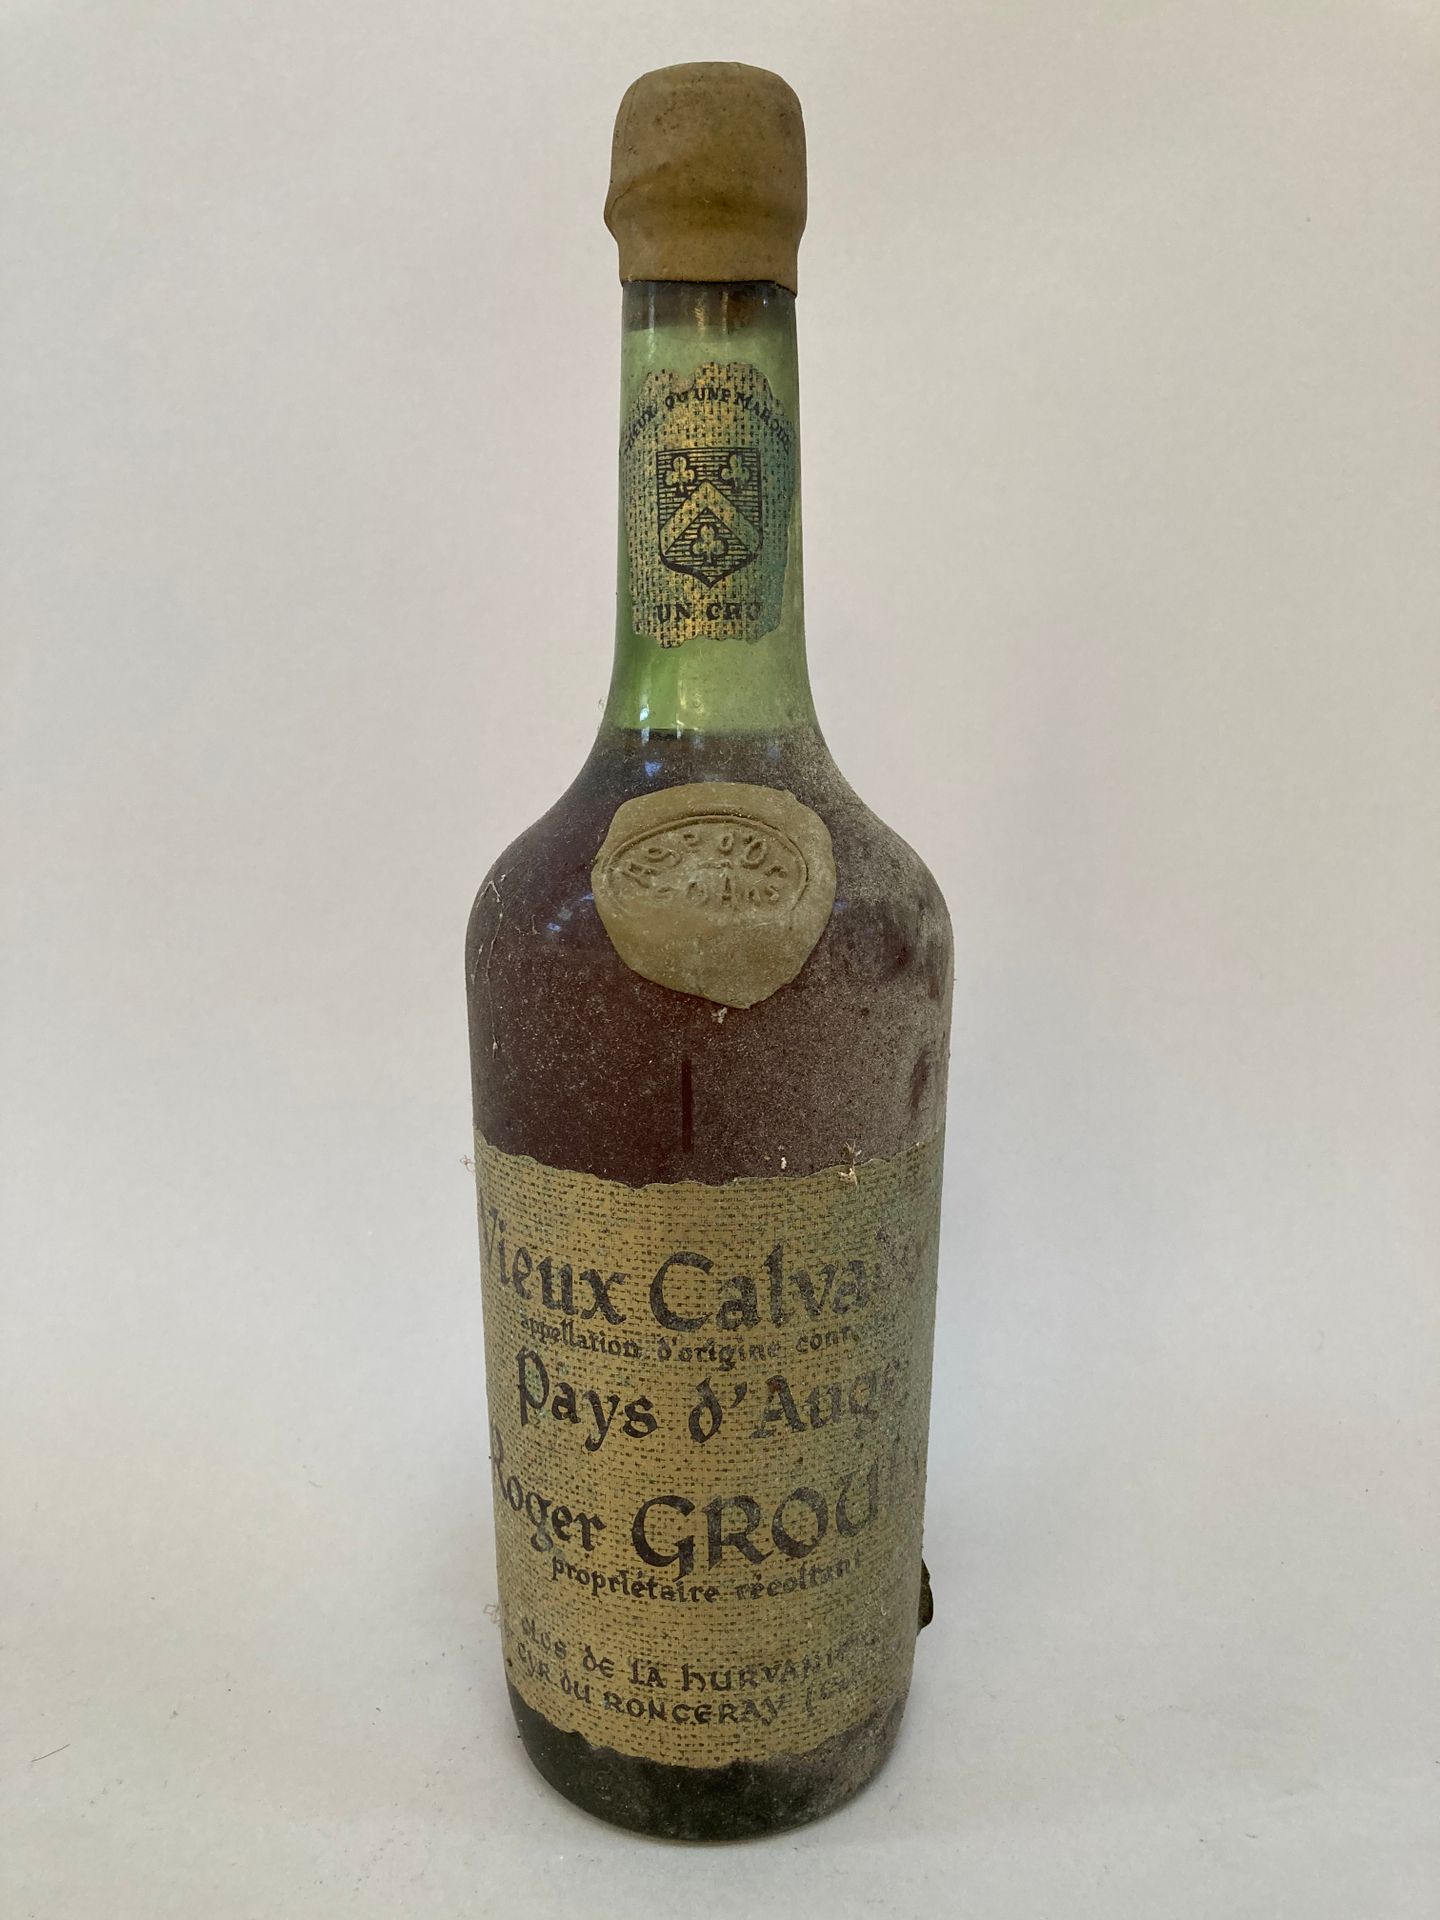 Null CALVADOS 50 years GOLDEN AGE - R. GROULT.蜡上有小瑕疵）。